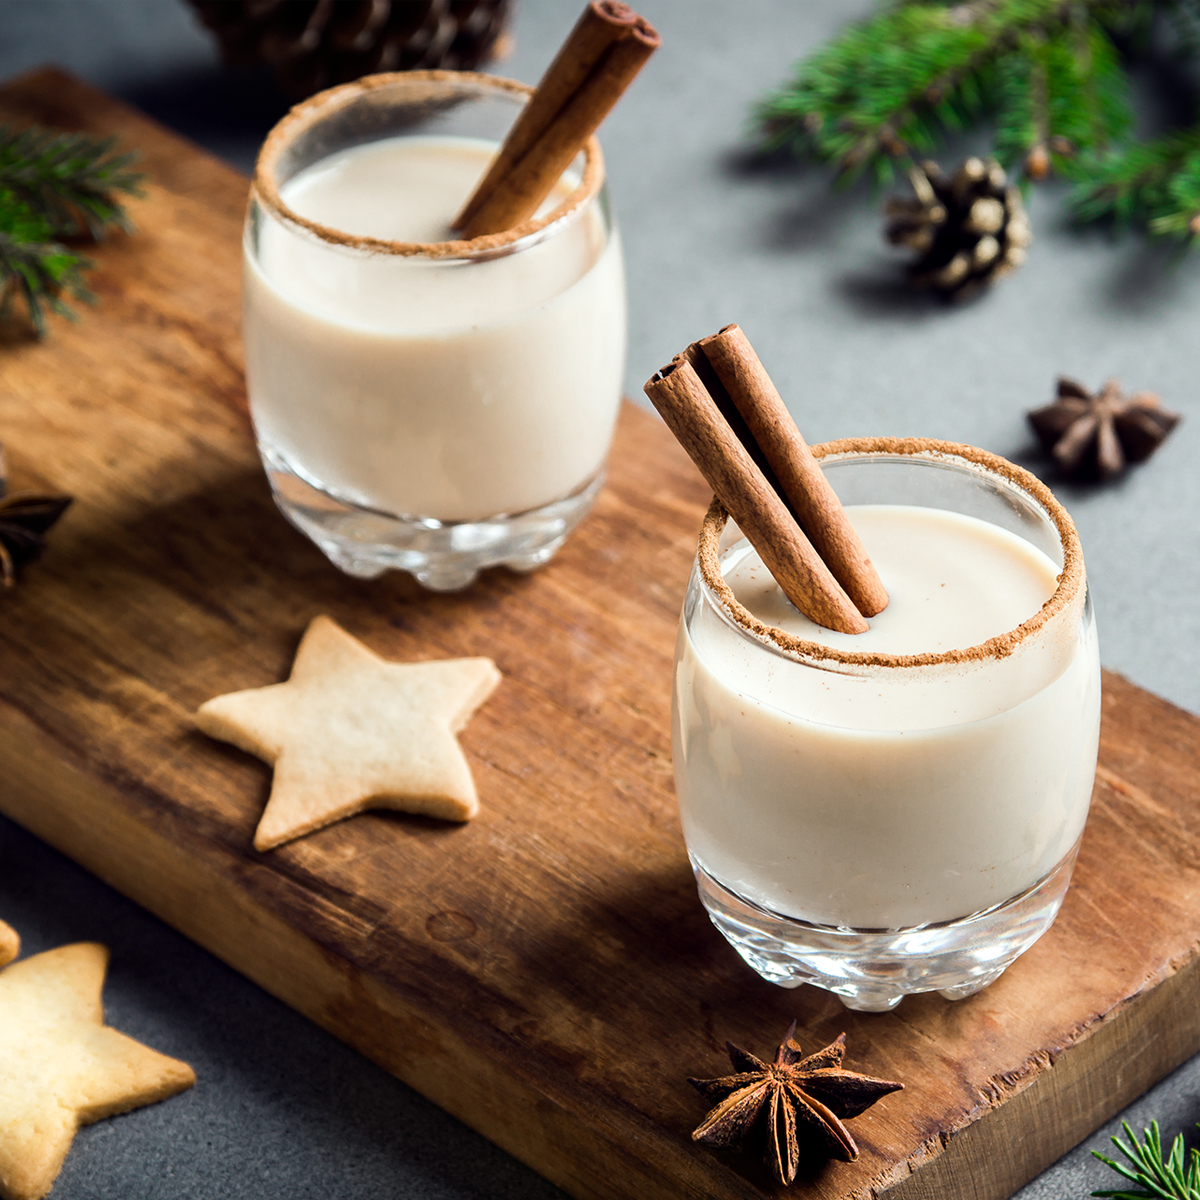 Festive food traditions to make your Christmas special